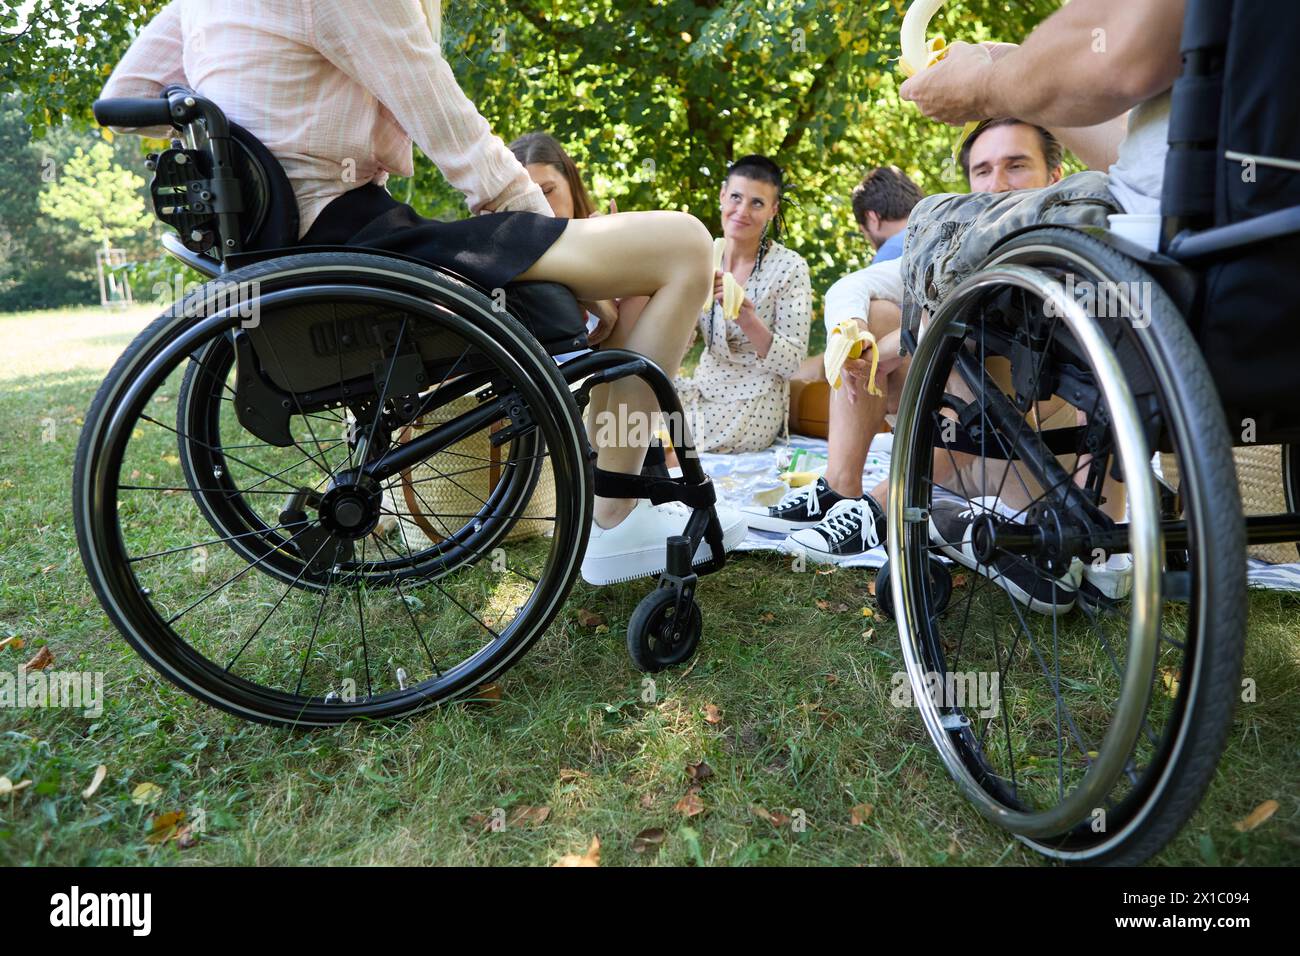 A group of friends with and without disabilities sharing a joyful picnic on a sunny day, showcasing inclusivity and friendship. Stock Photo